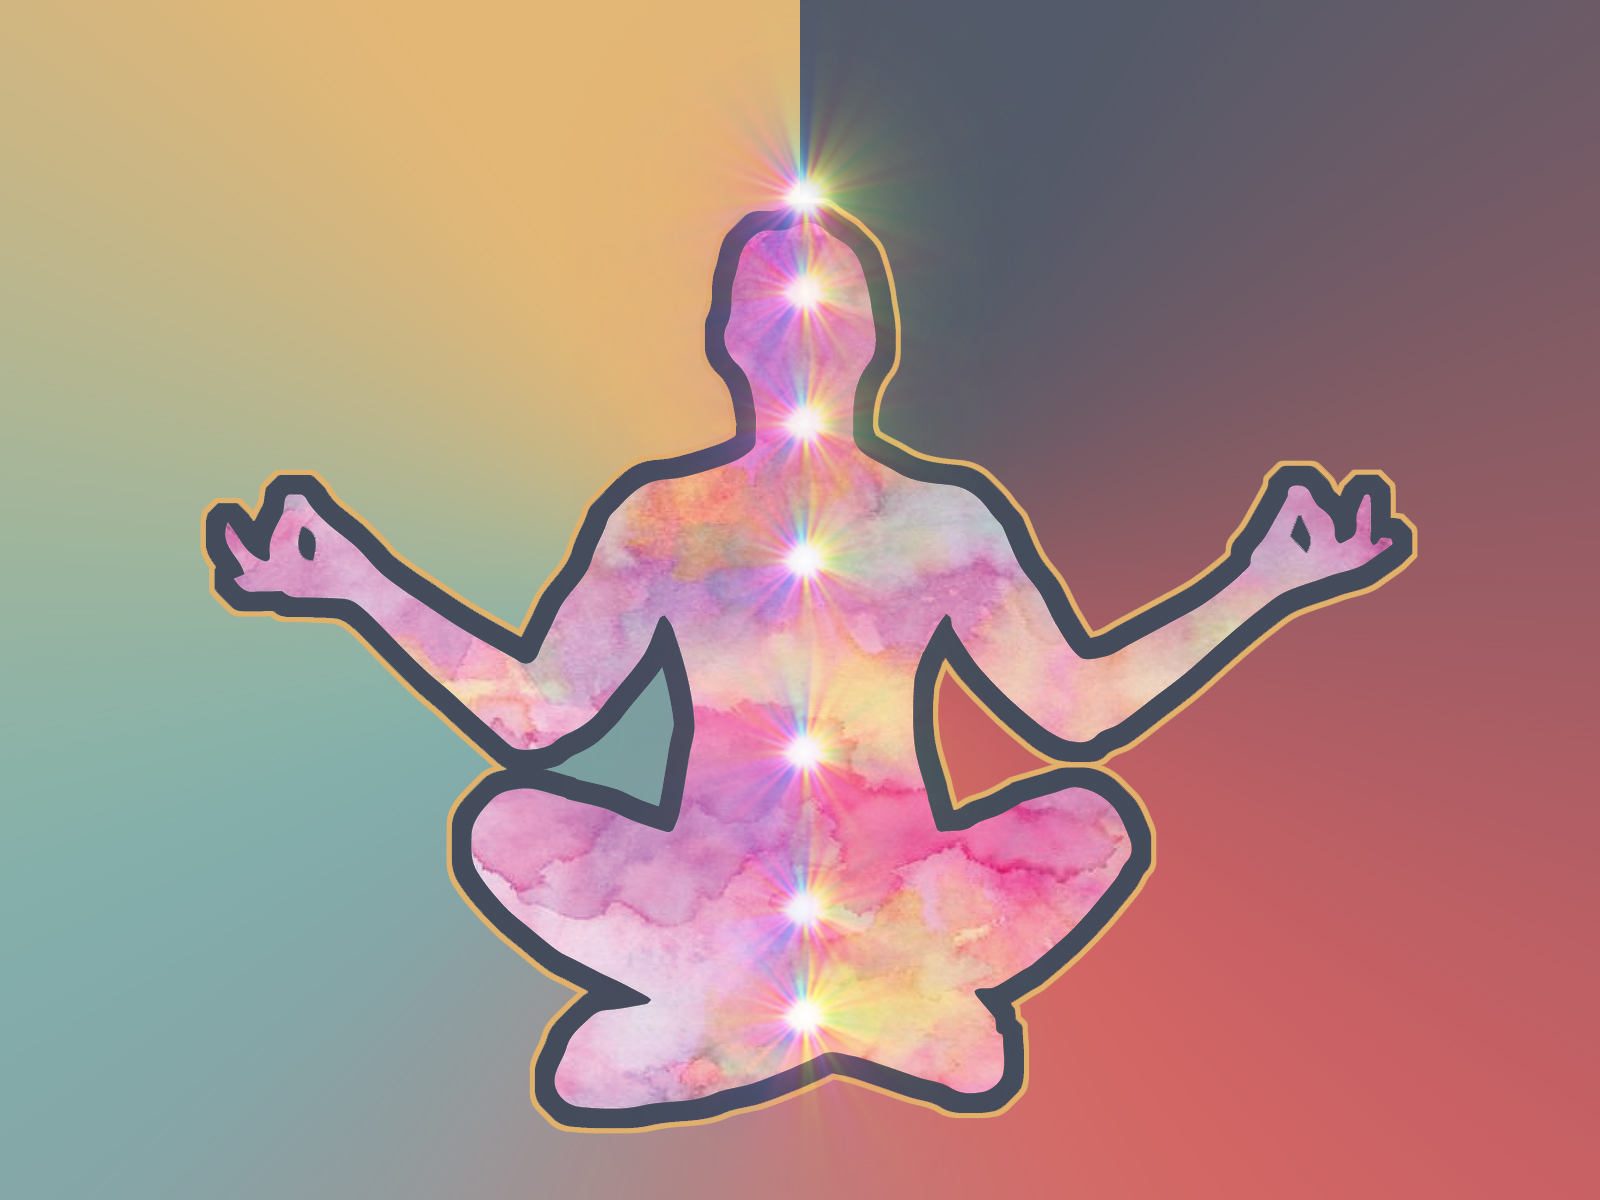 Graphic of a person meditating